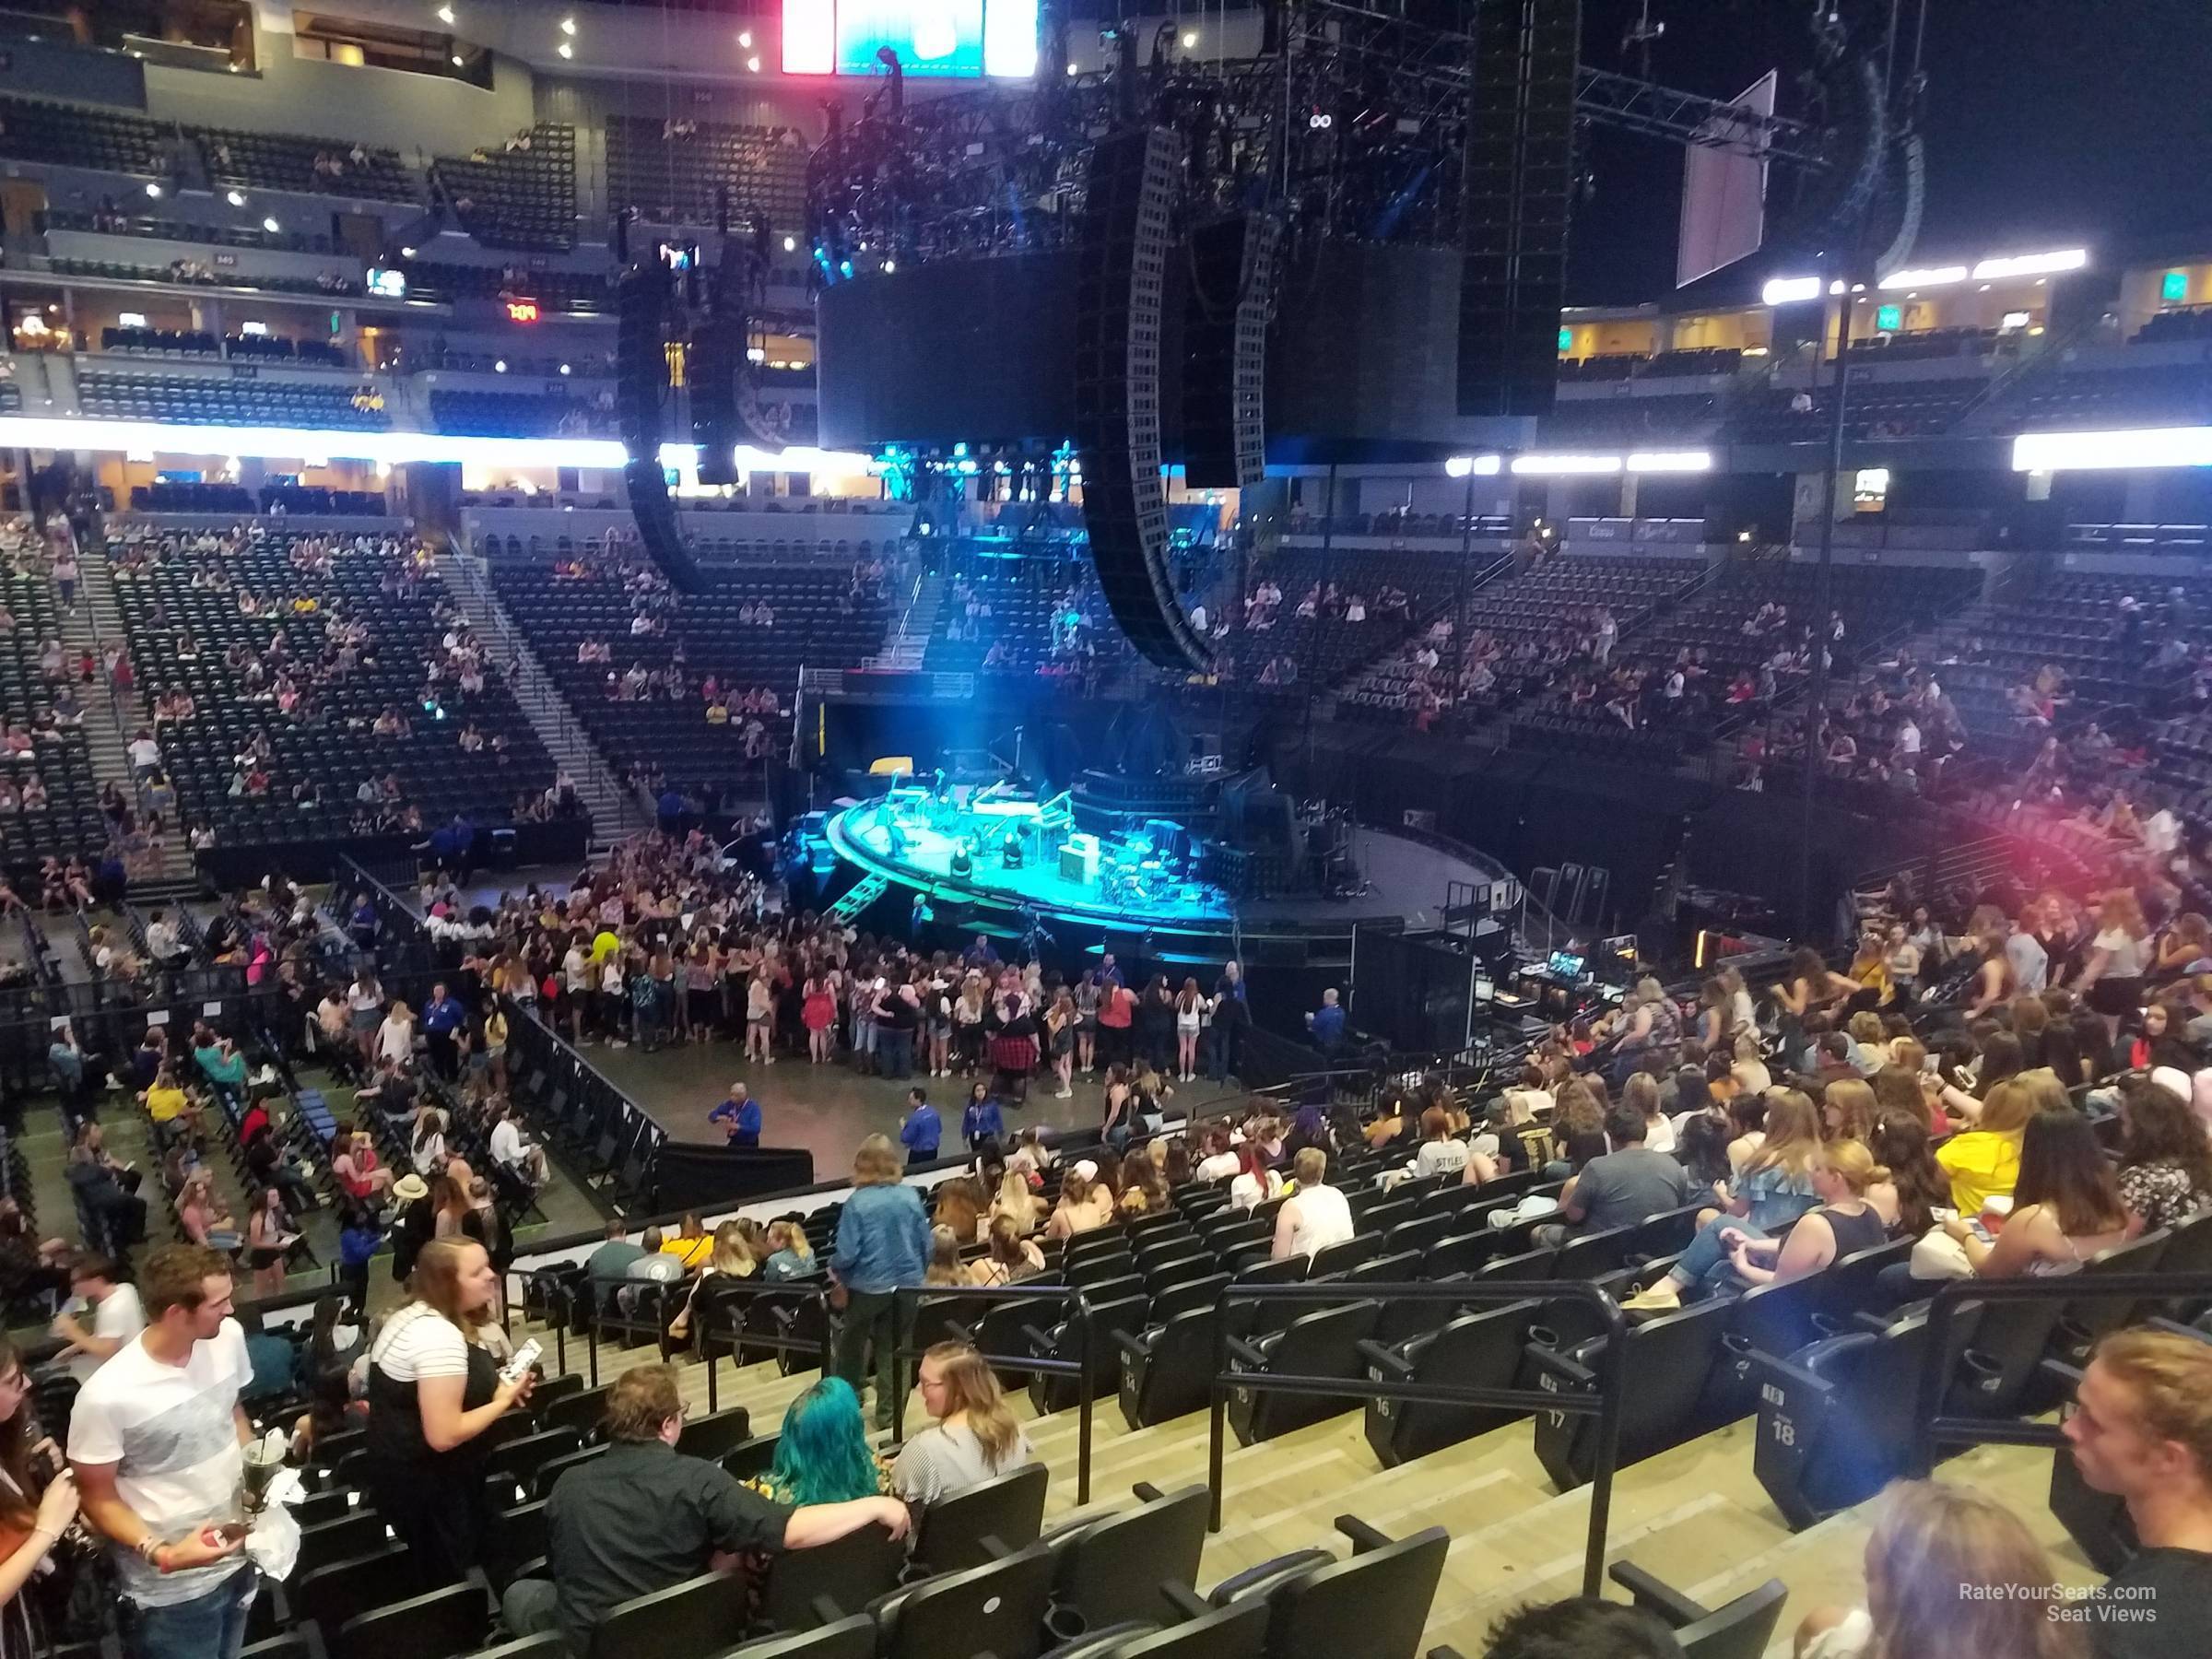 Pepsi Center Section 148 Concert Seating - RateYourSeats.com2400 x 1800